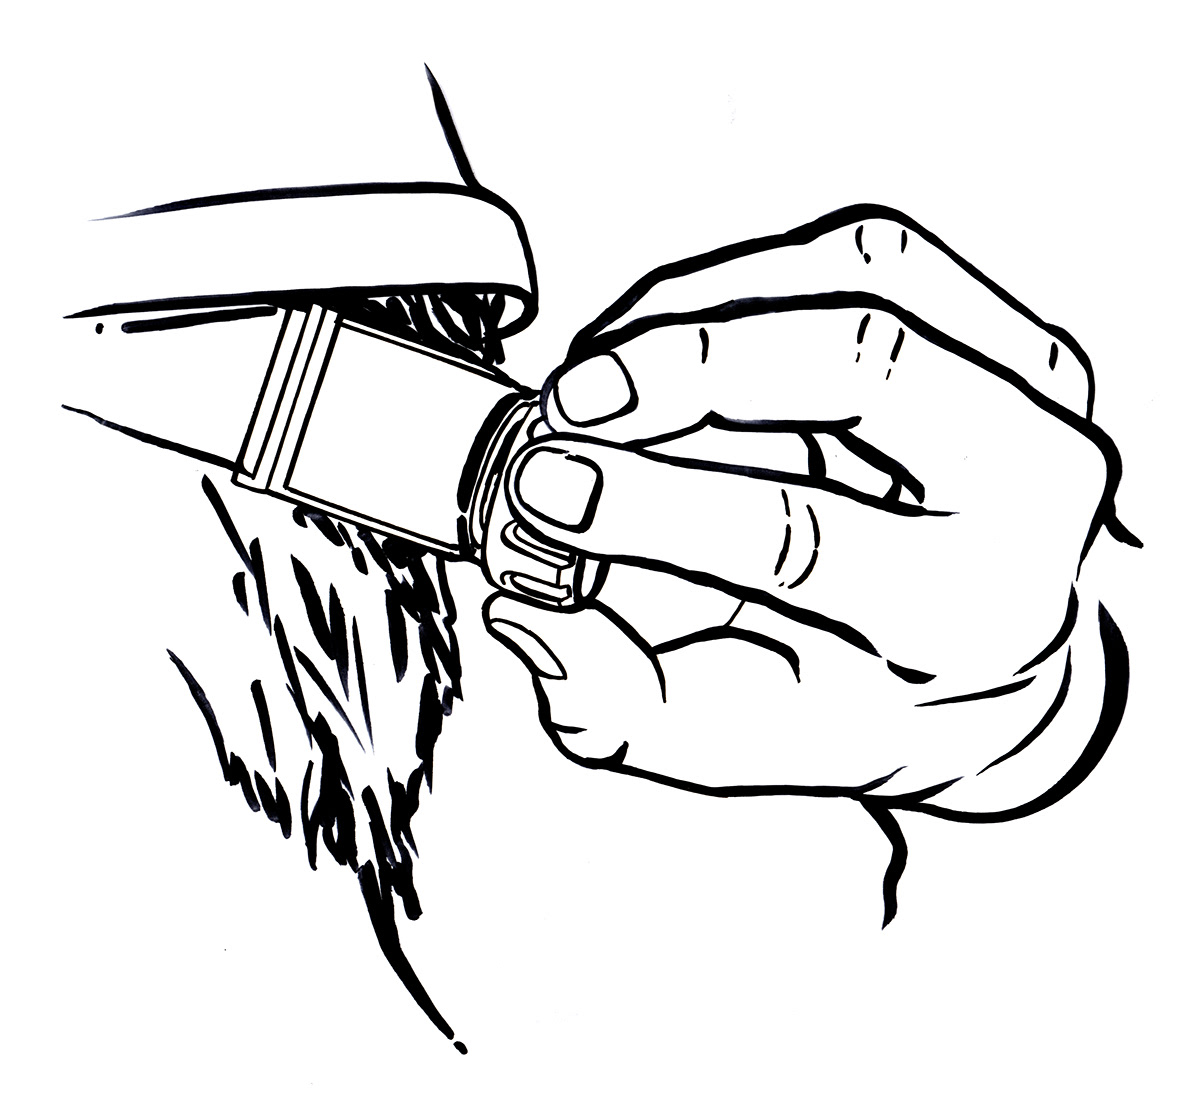 instructional instructions hands rendering traditional pen and ink Marker